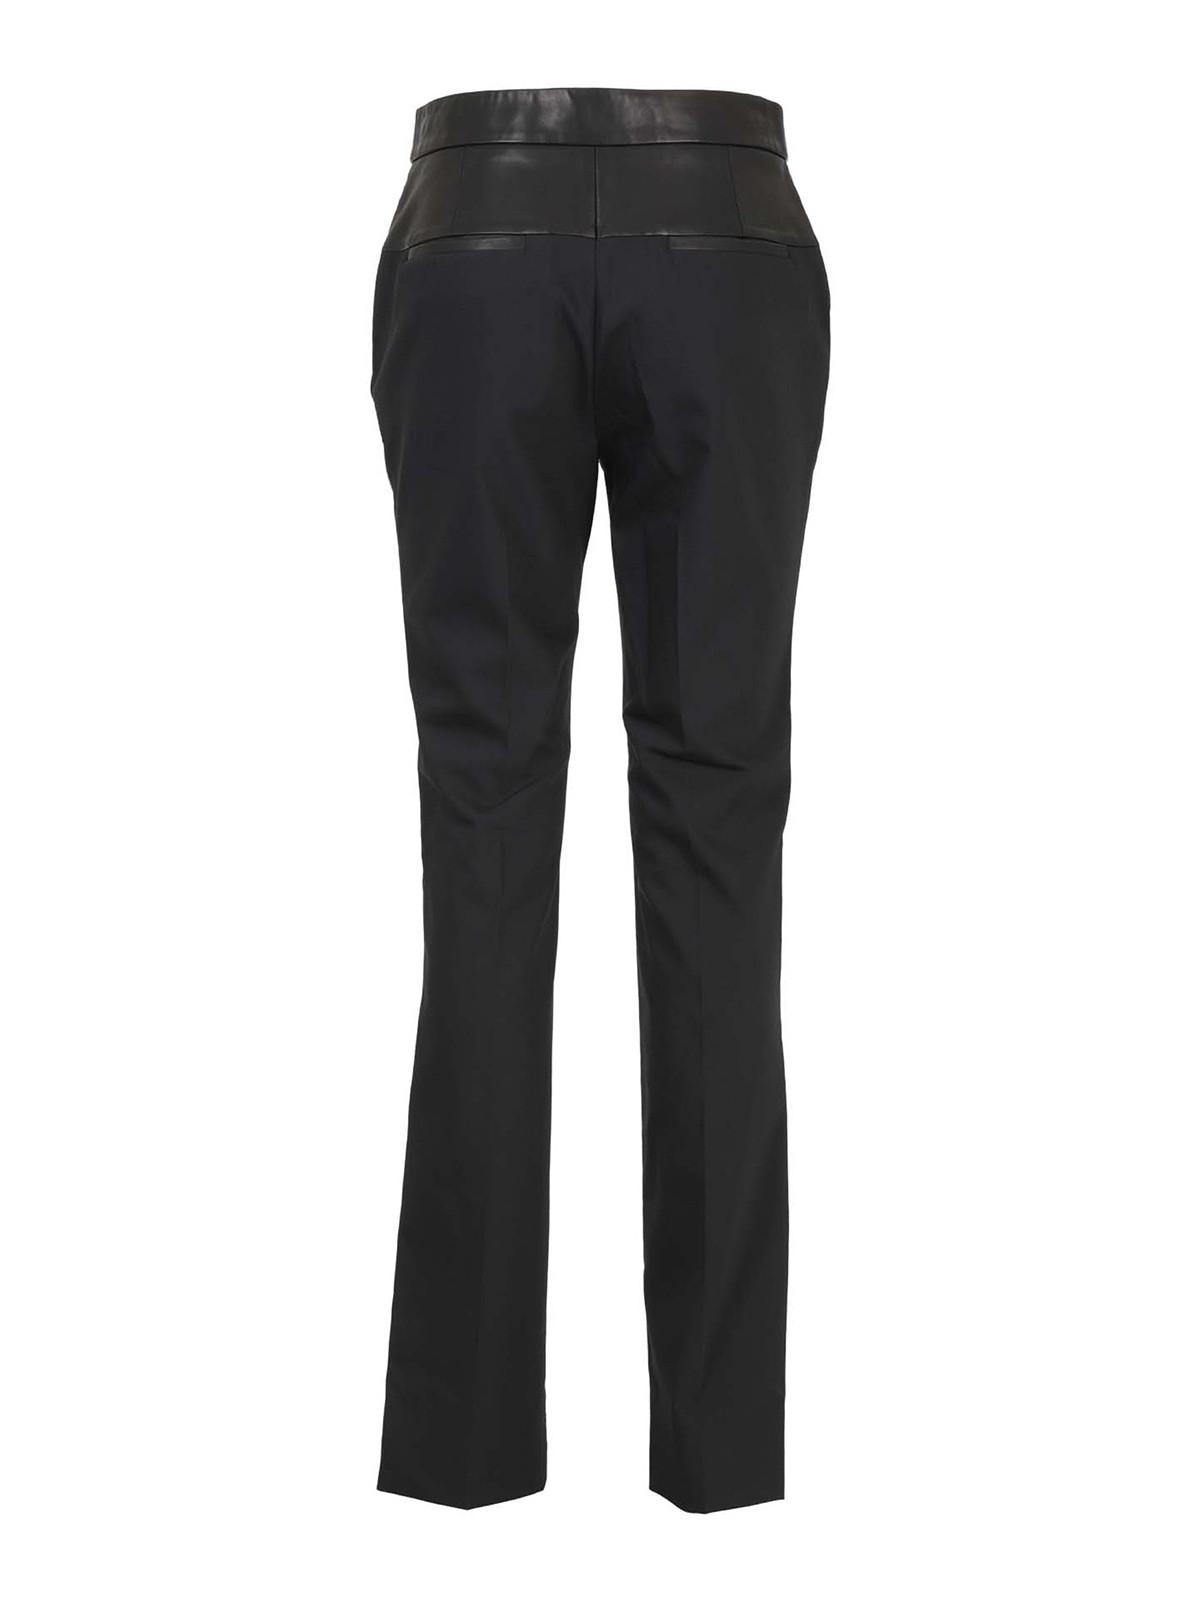 Helmut Lang Wool And Leather Blend Pants in Black - Lyst